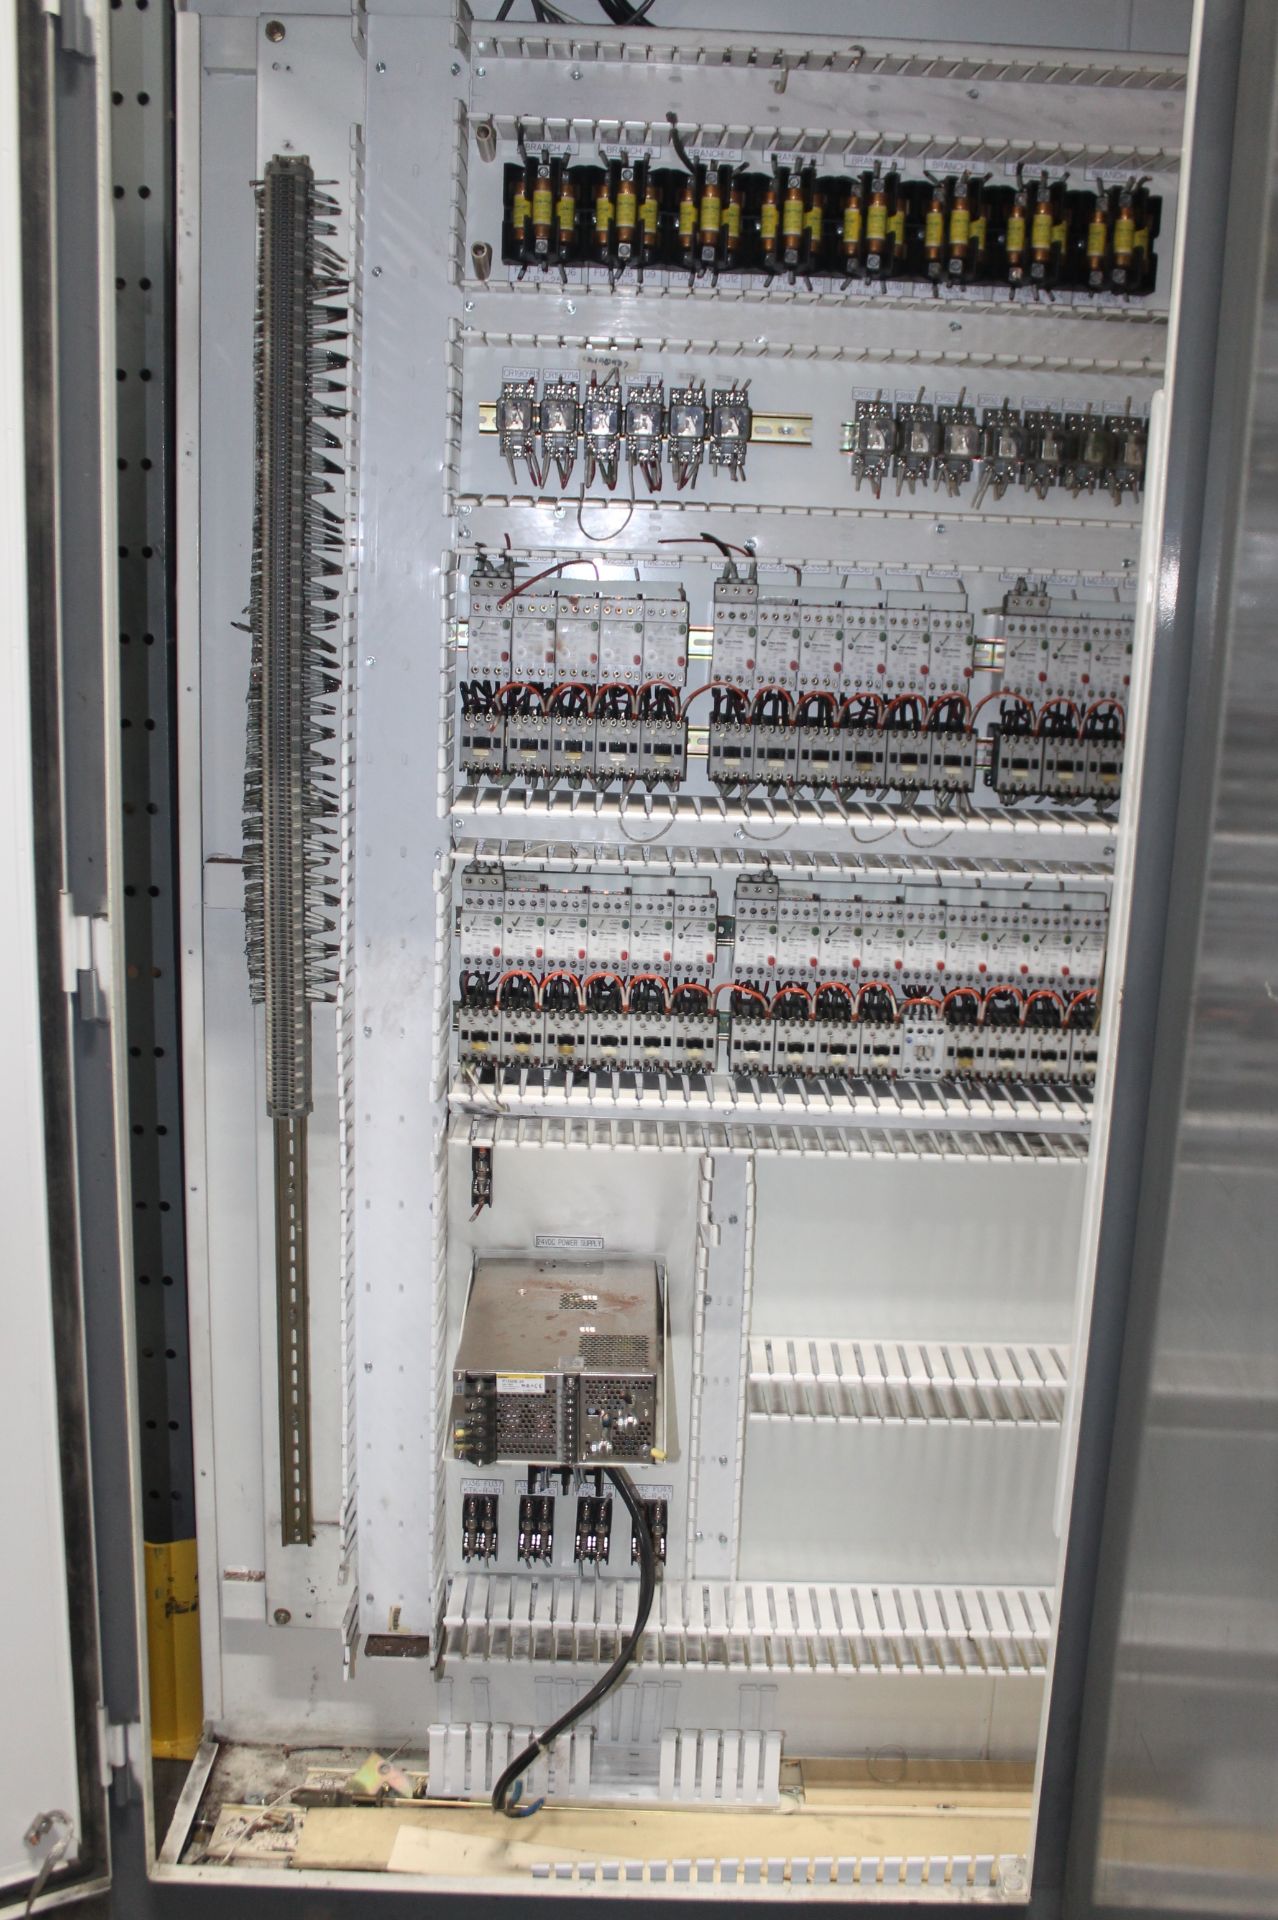 BUSCHMAN CONVEYOR AUTOMATION CONTROL PANEL CABINET WITH CONTROLS, CABINET SIZE: 90"L X 20"W X 87"H - Image 3 of 12